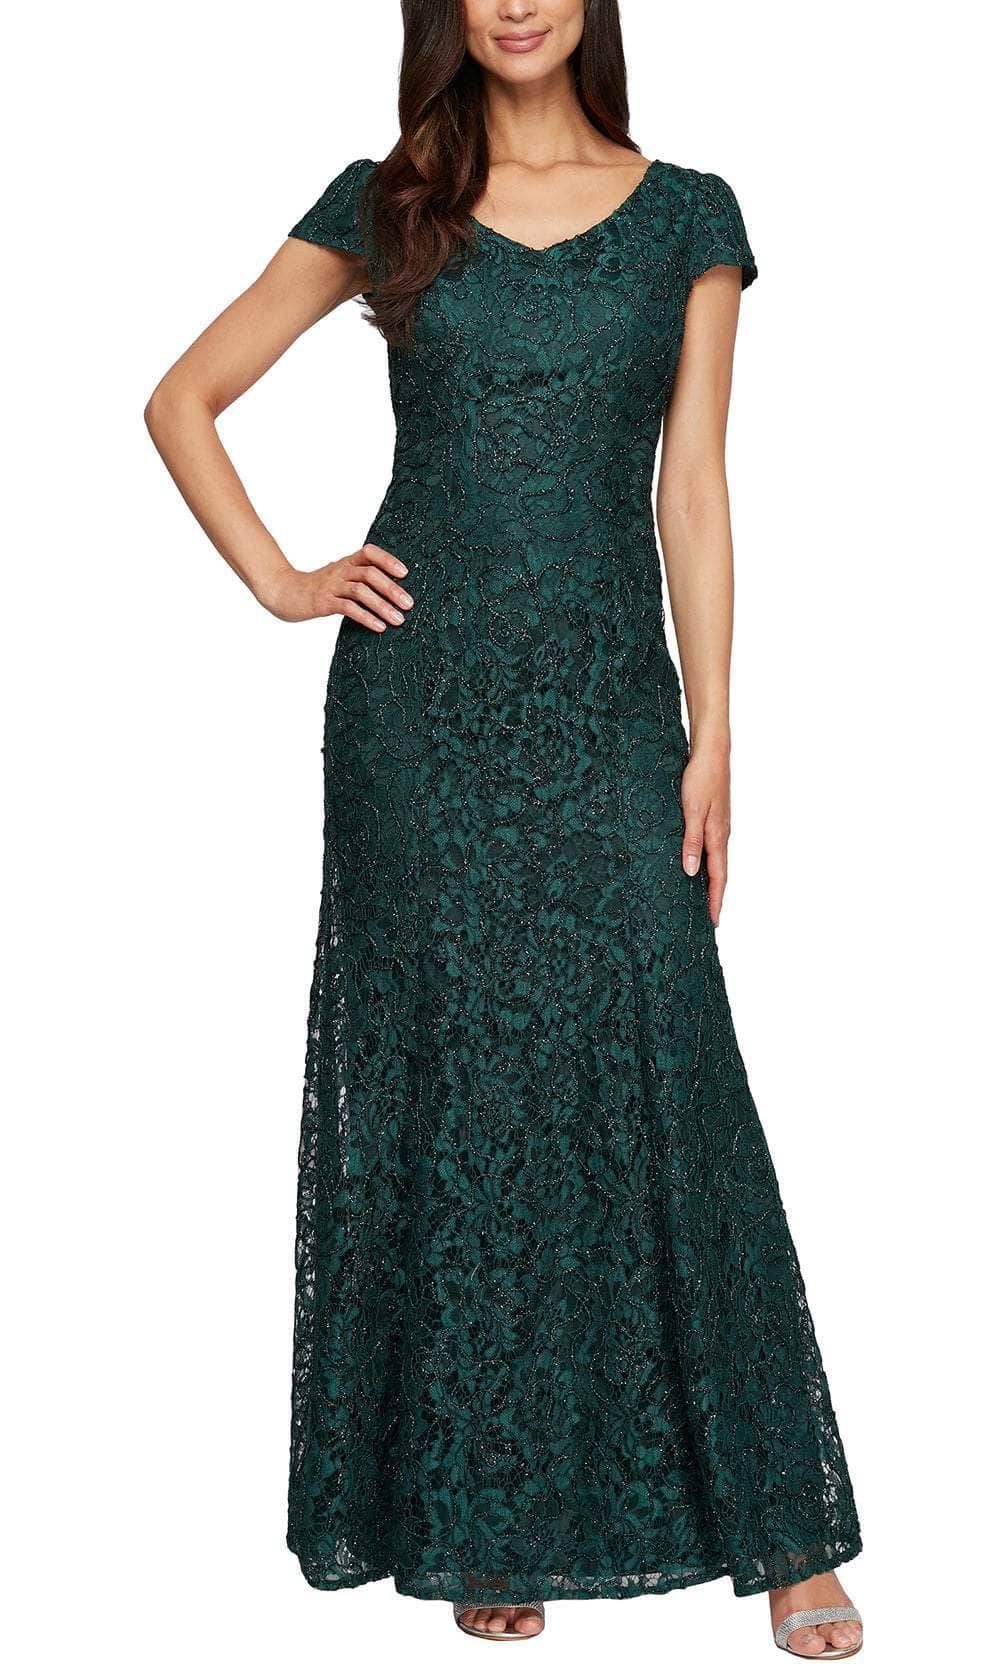 Alex Evenings 811223231 - Corded Lace Evening Dress Special Occasion Dress